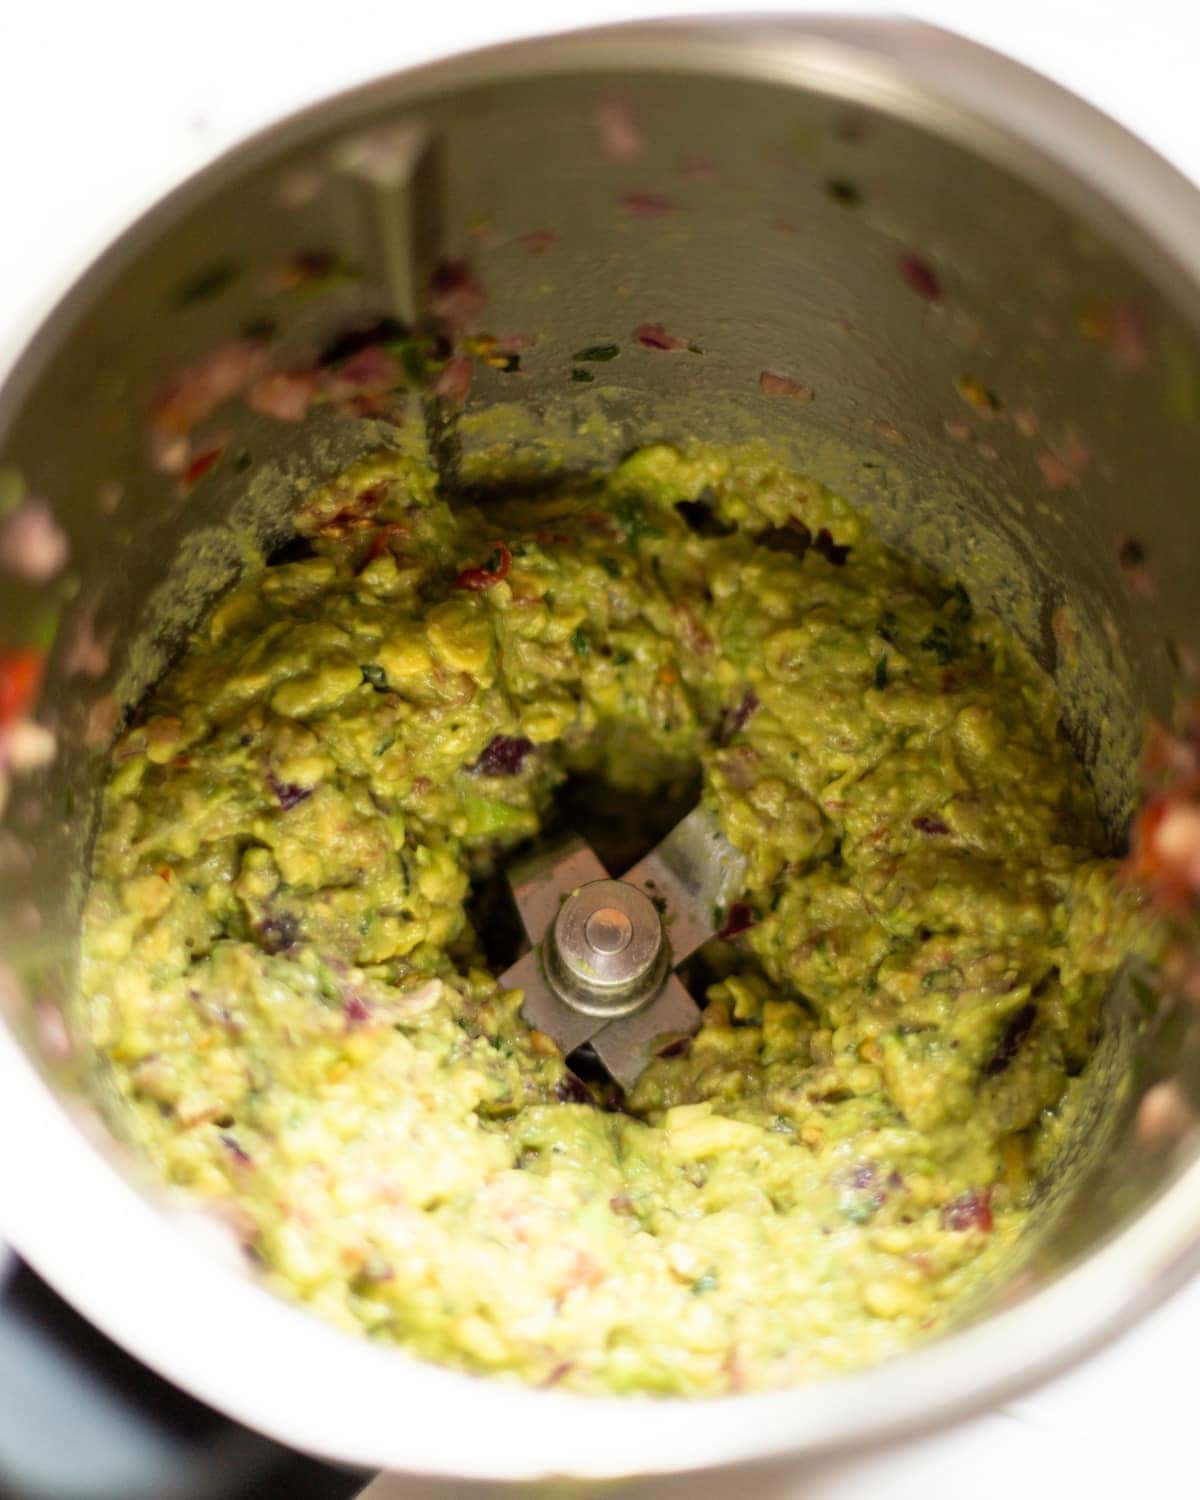 The finished guacamole, inside the Thermomix bowl.